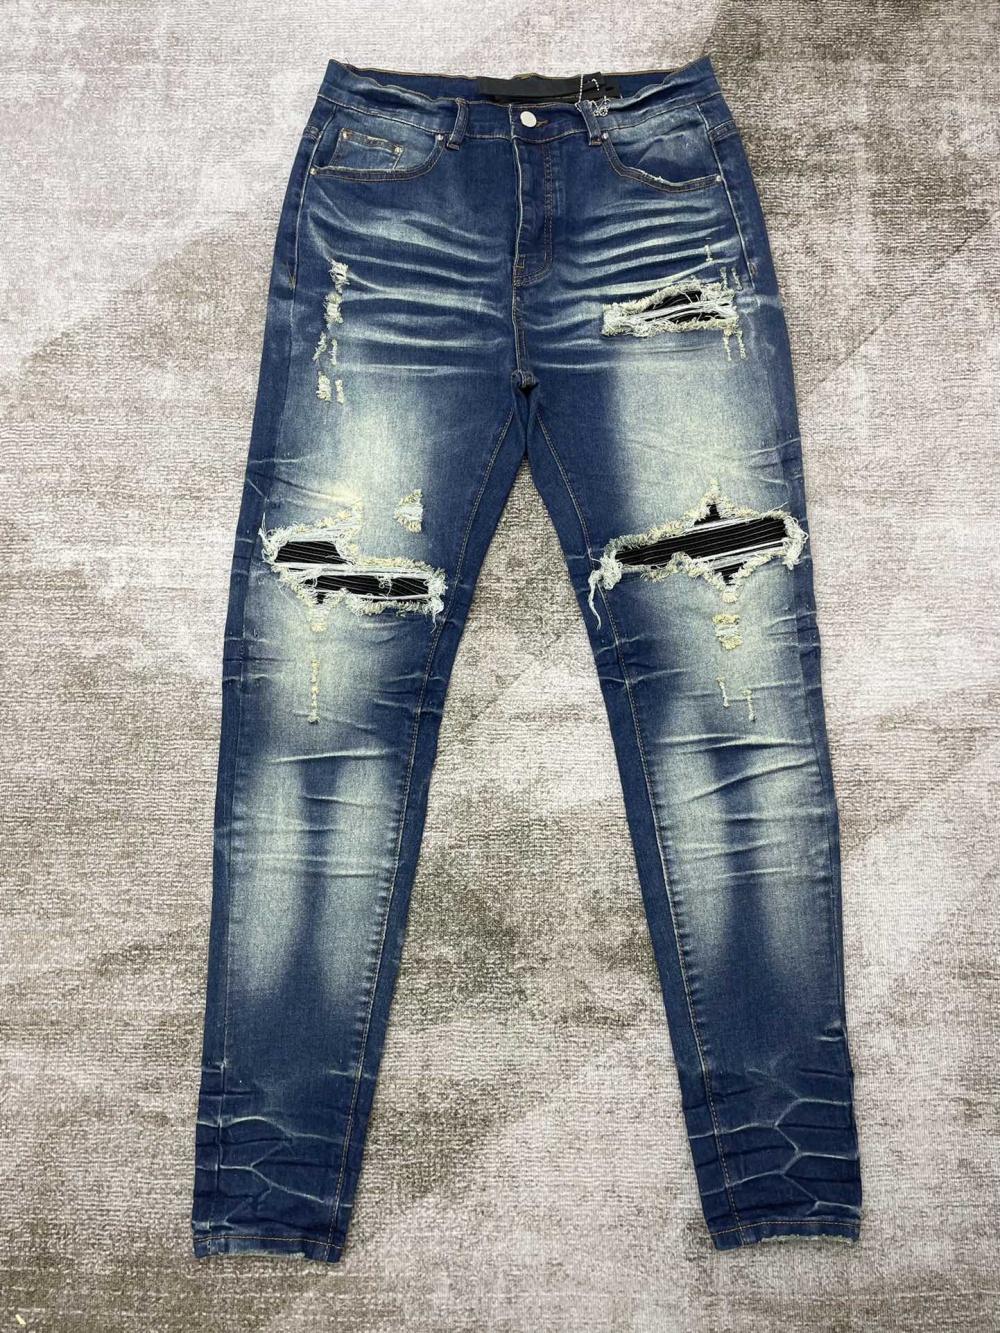 US$ 135.92 - 1:1 quality version Mended jeans - www.repdog.cn